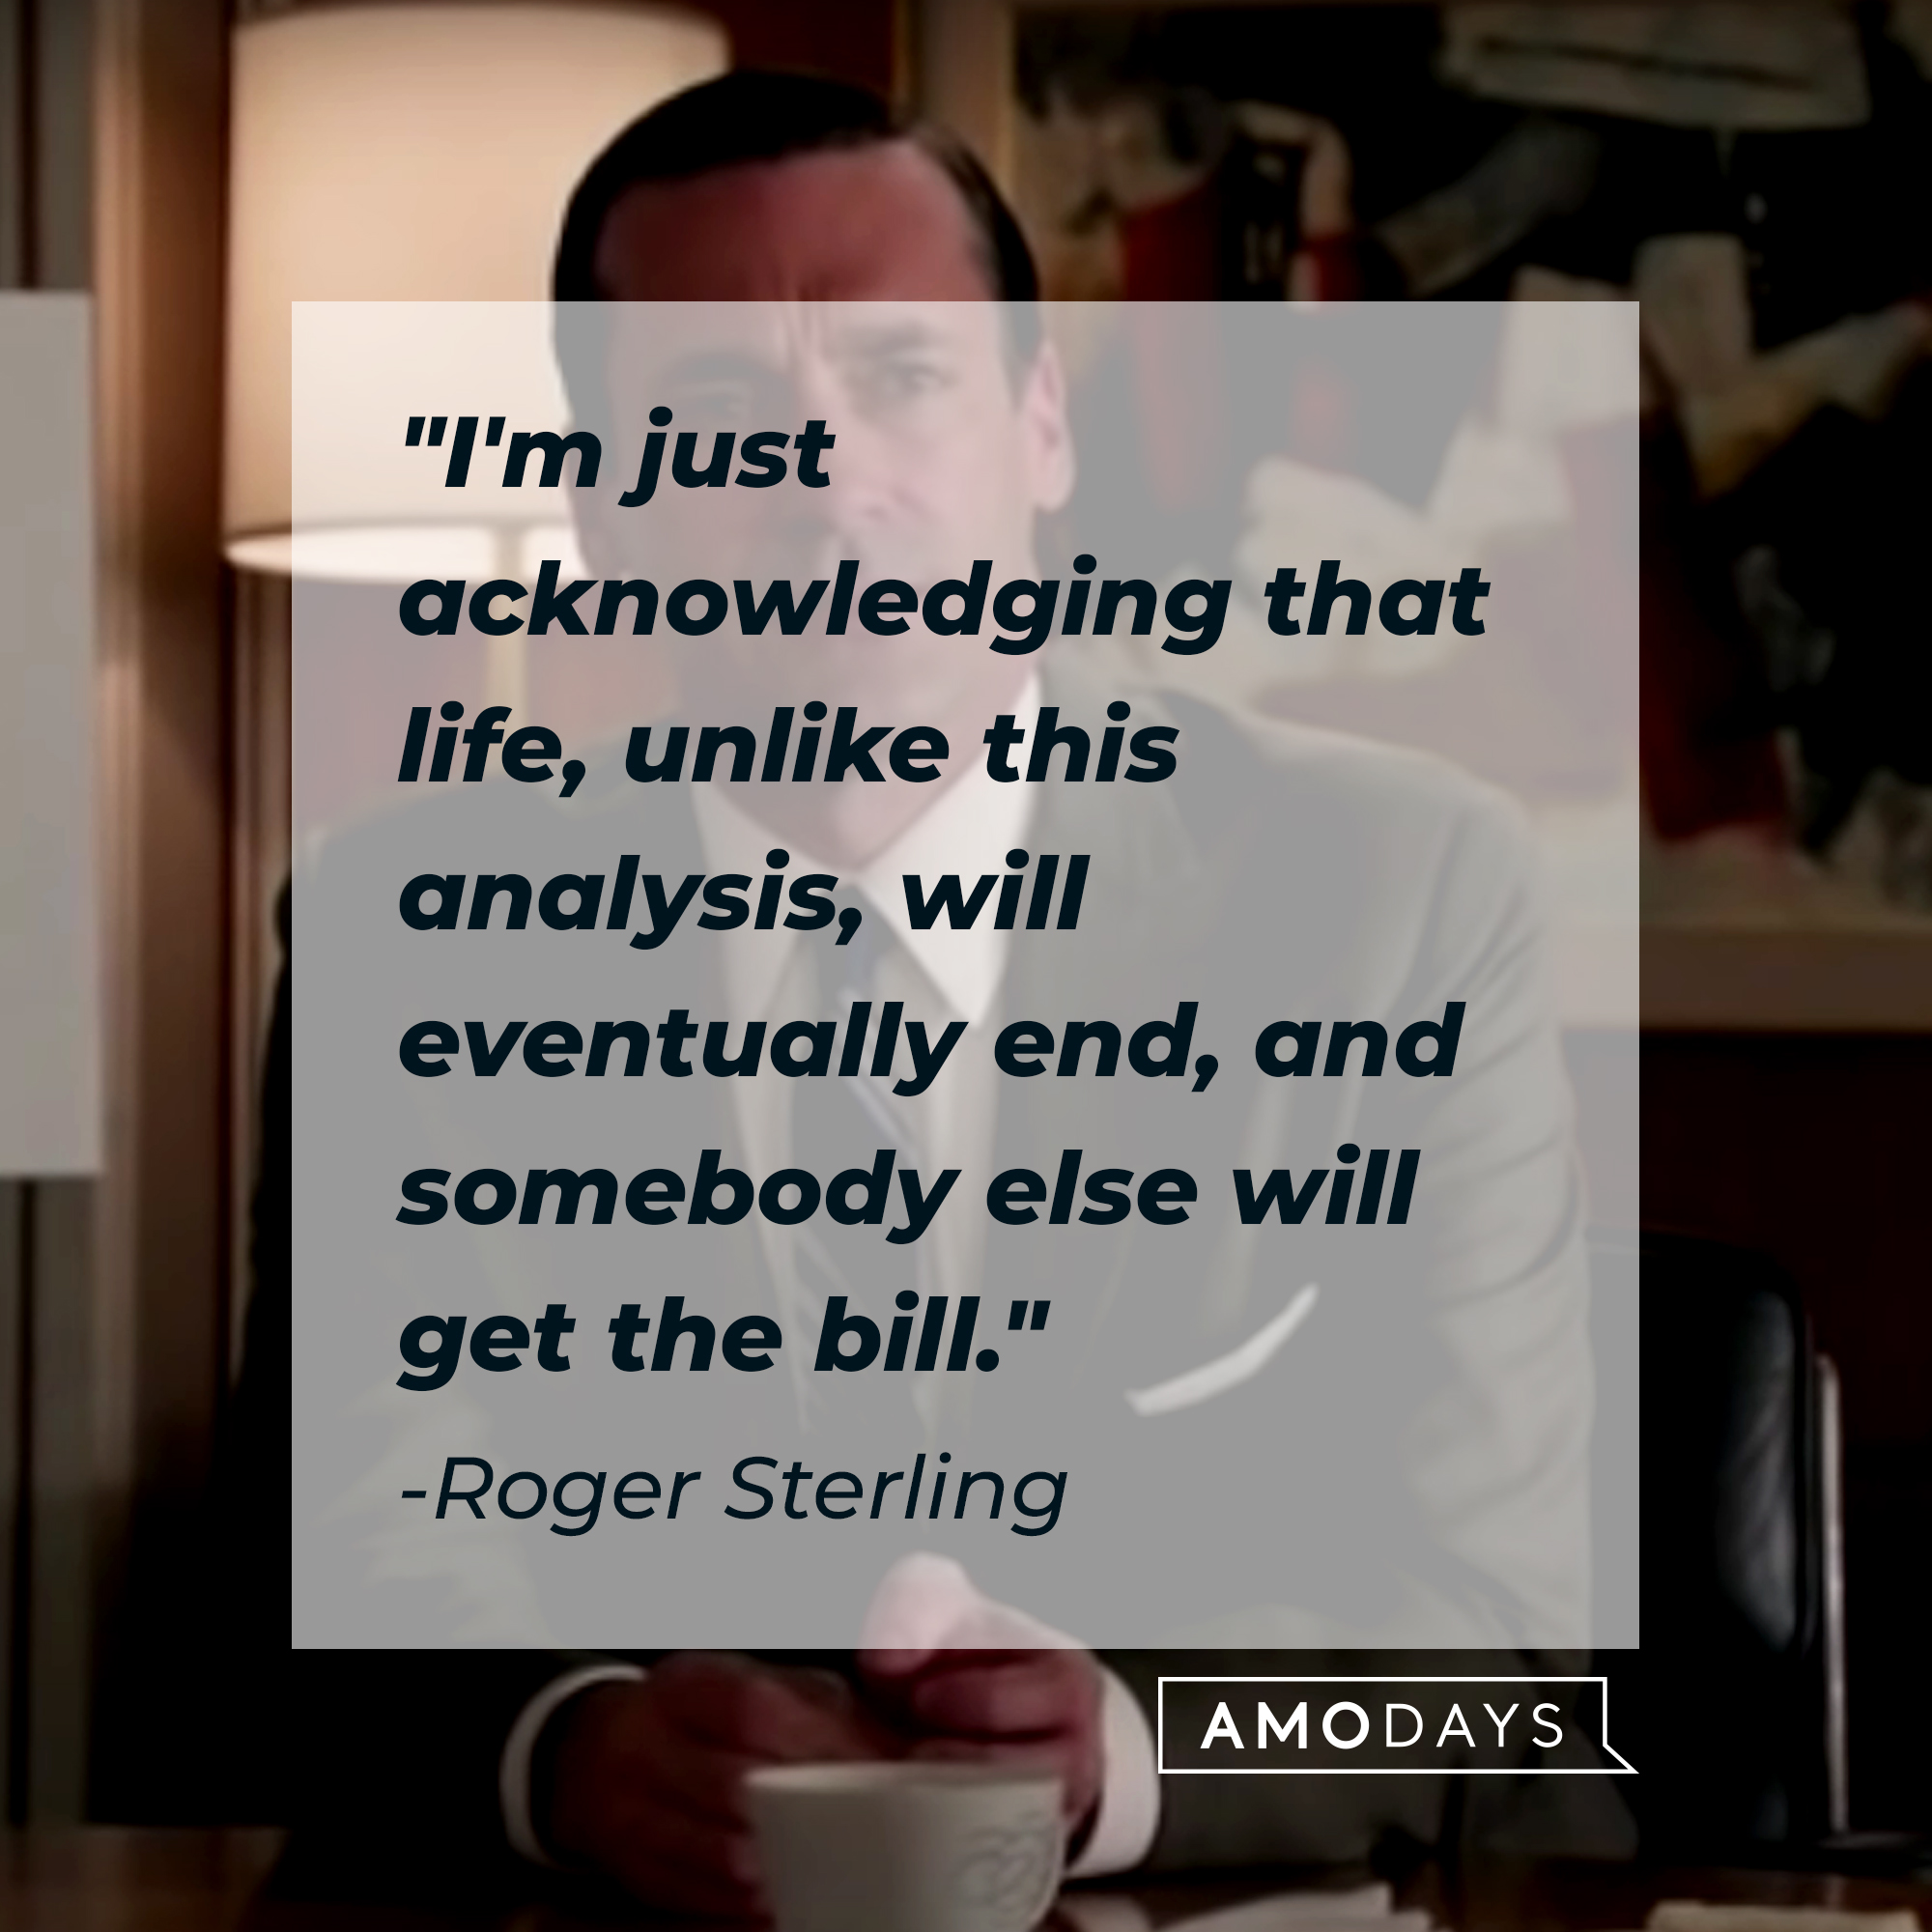 Roger Sterling's quote: "I'm just acknowledging that life, unlike this analysis, will eventually end, and somebody else will get the bill." | Source: Facebook.com/MadMen